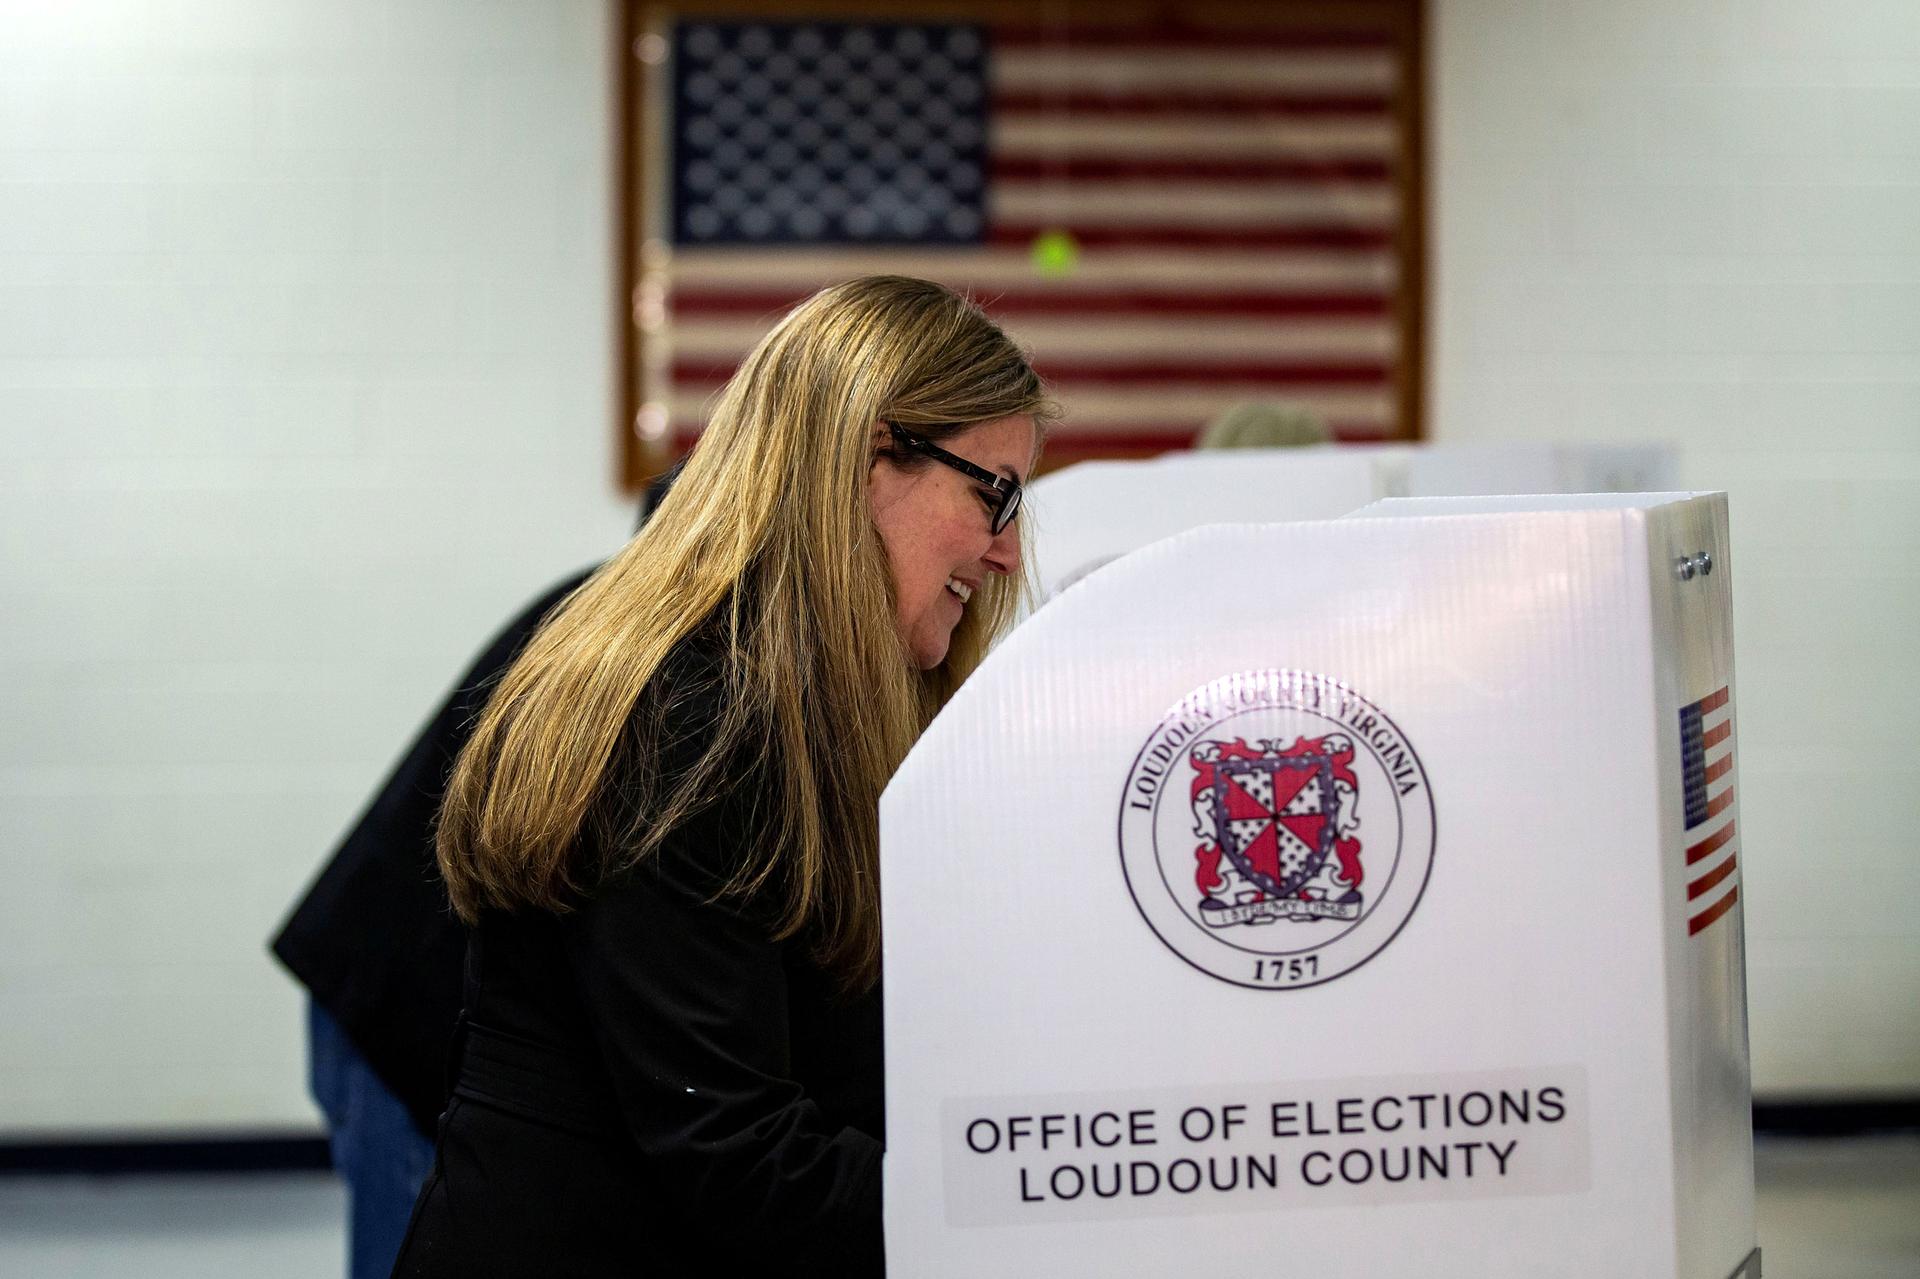 A woman uses a voting booth that says Office of Elections Loudon County.